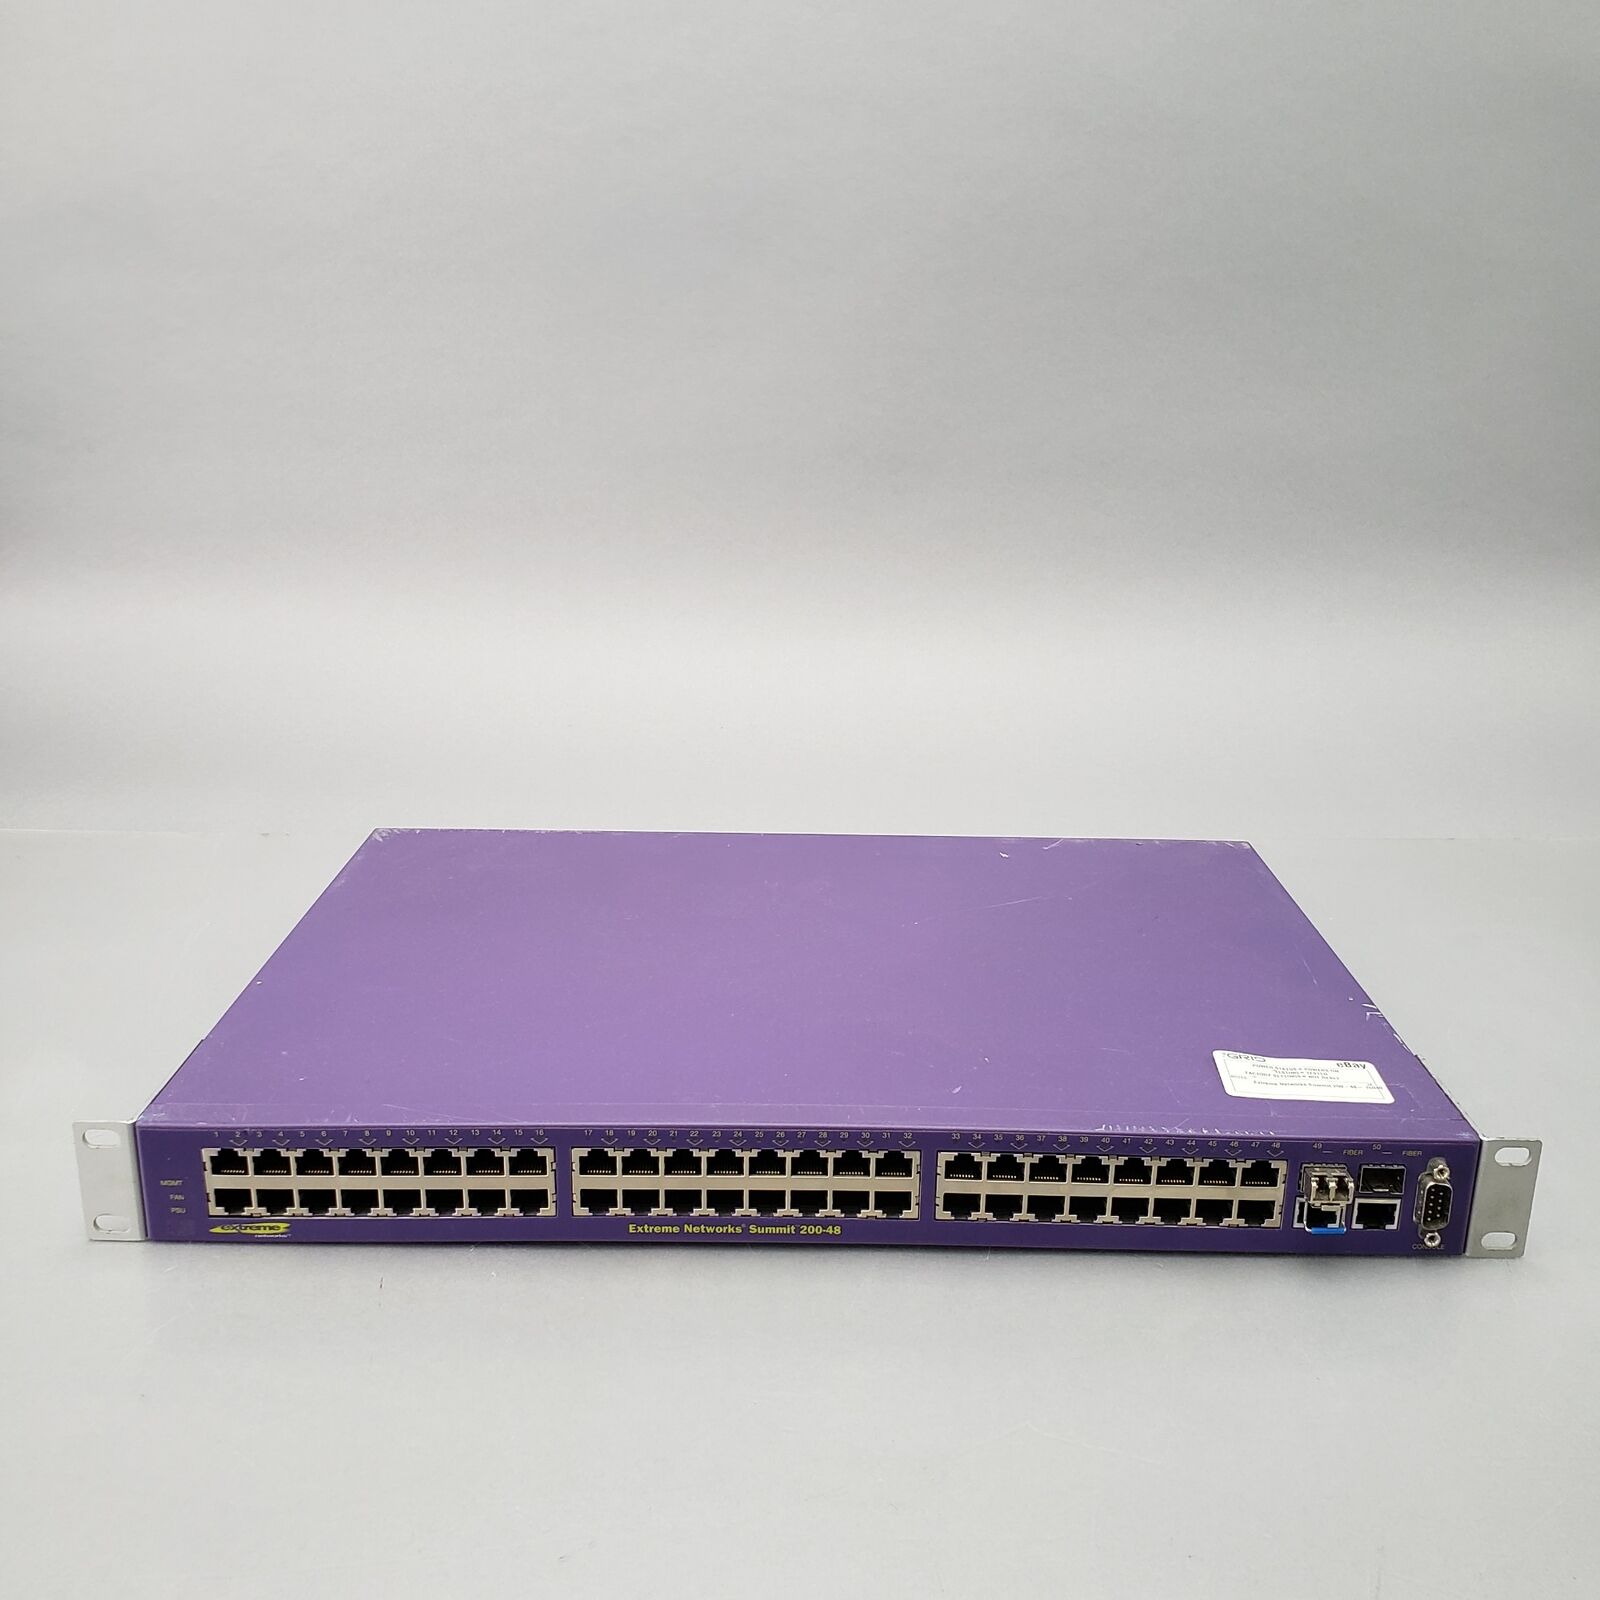 Extreme Networks Summit 200-48 15040 48-Port Ethernet Switch - Tested